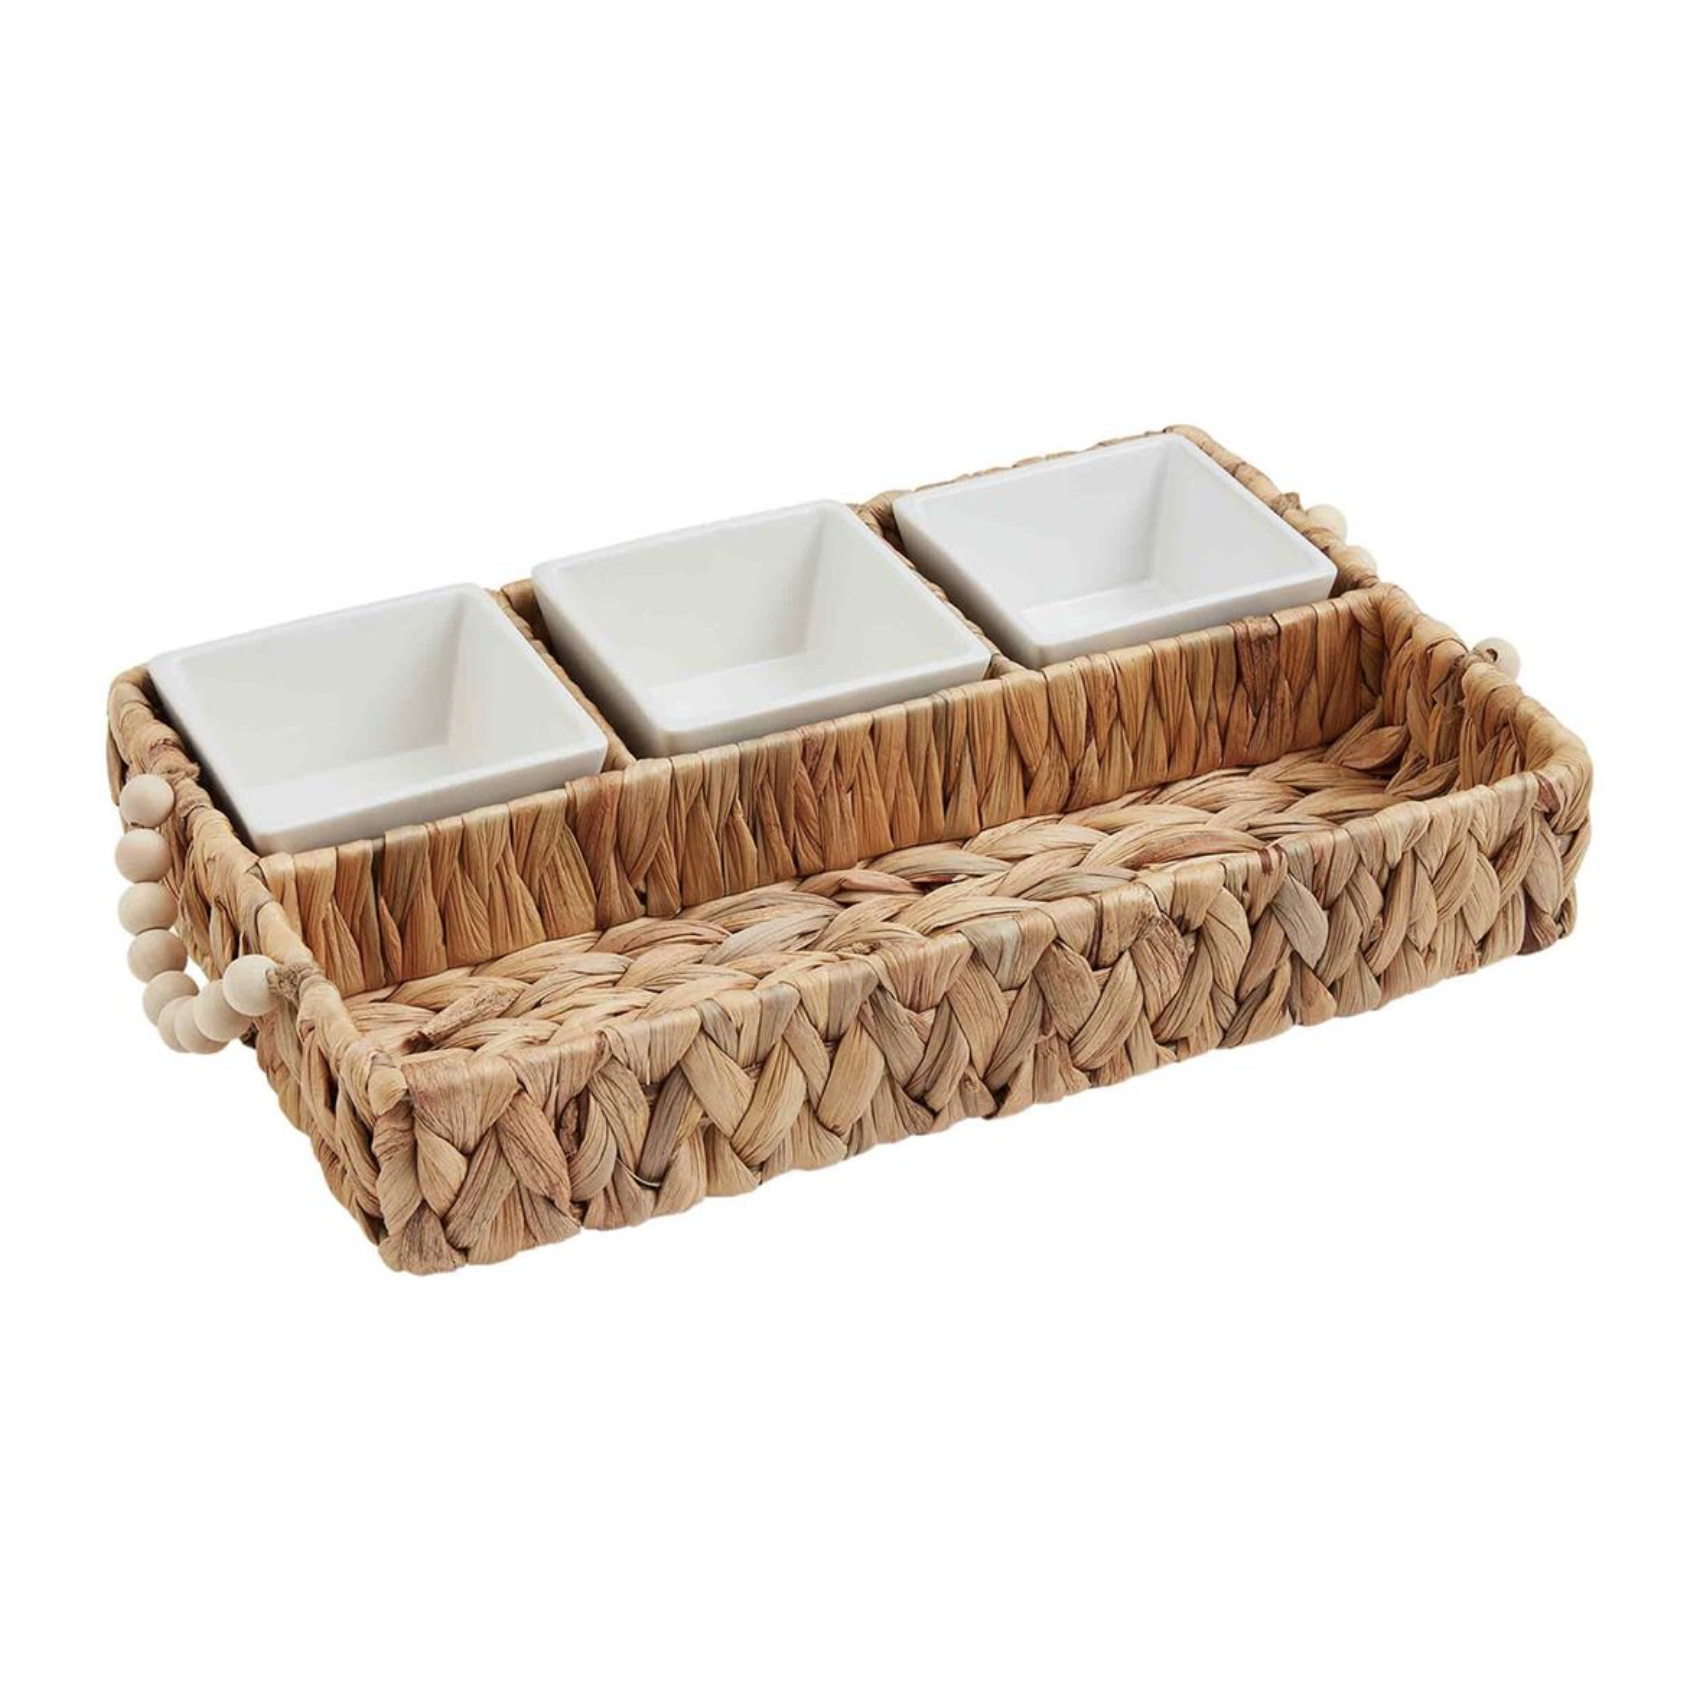 MUD PIE WOVEN TRAY & DIP CUP SET